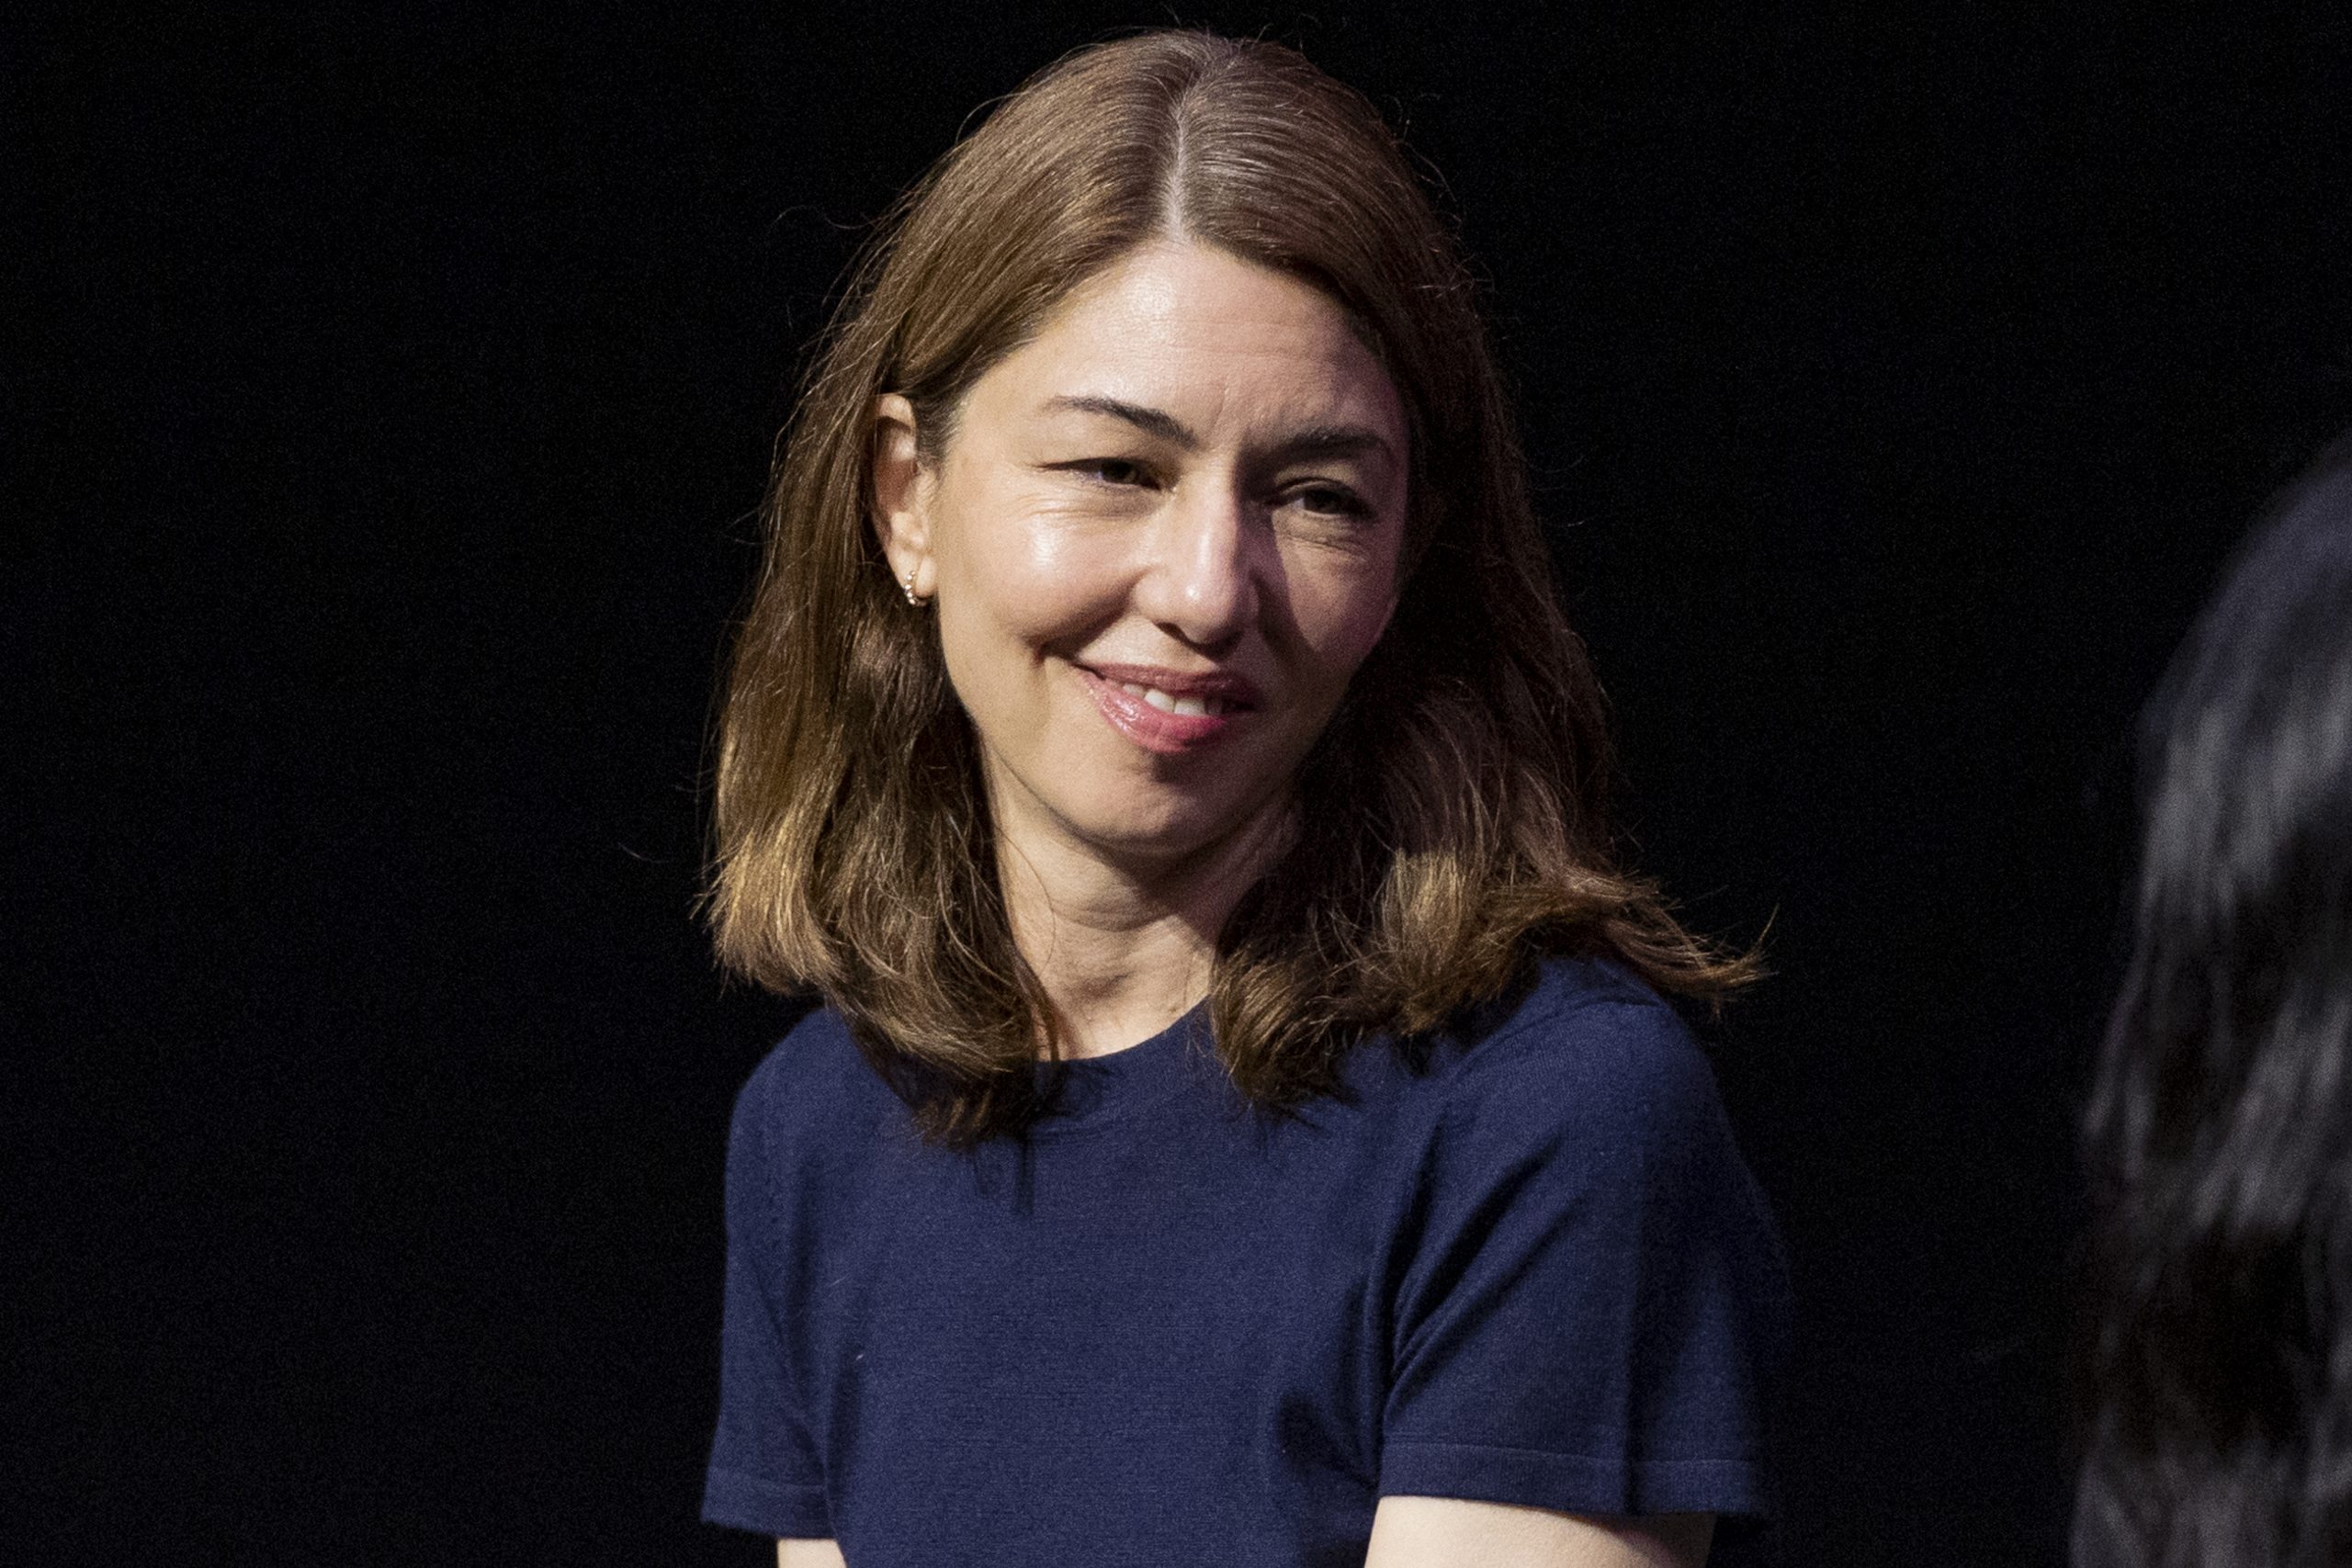 Sofia Coppola Says She Ignores Her Father’s Suggestions to Re-Cut Her Films: ‘I Don’t Have Any Desire to’